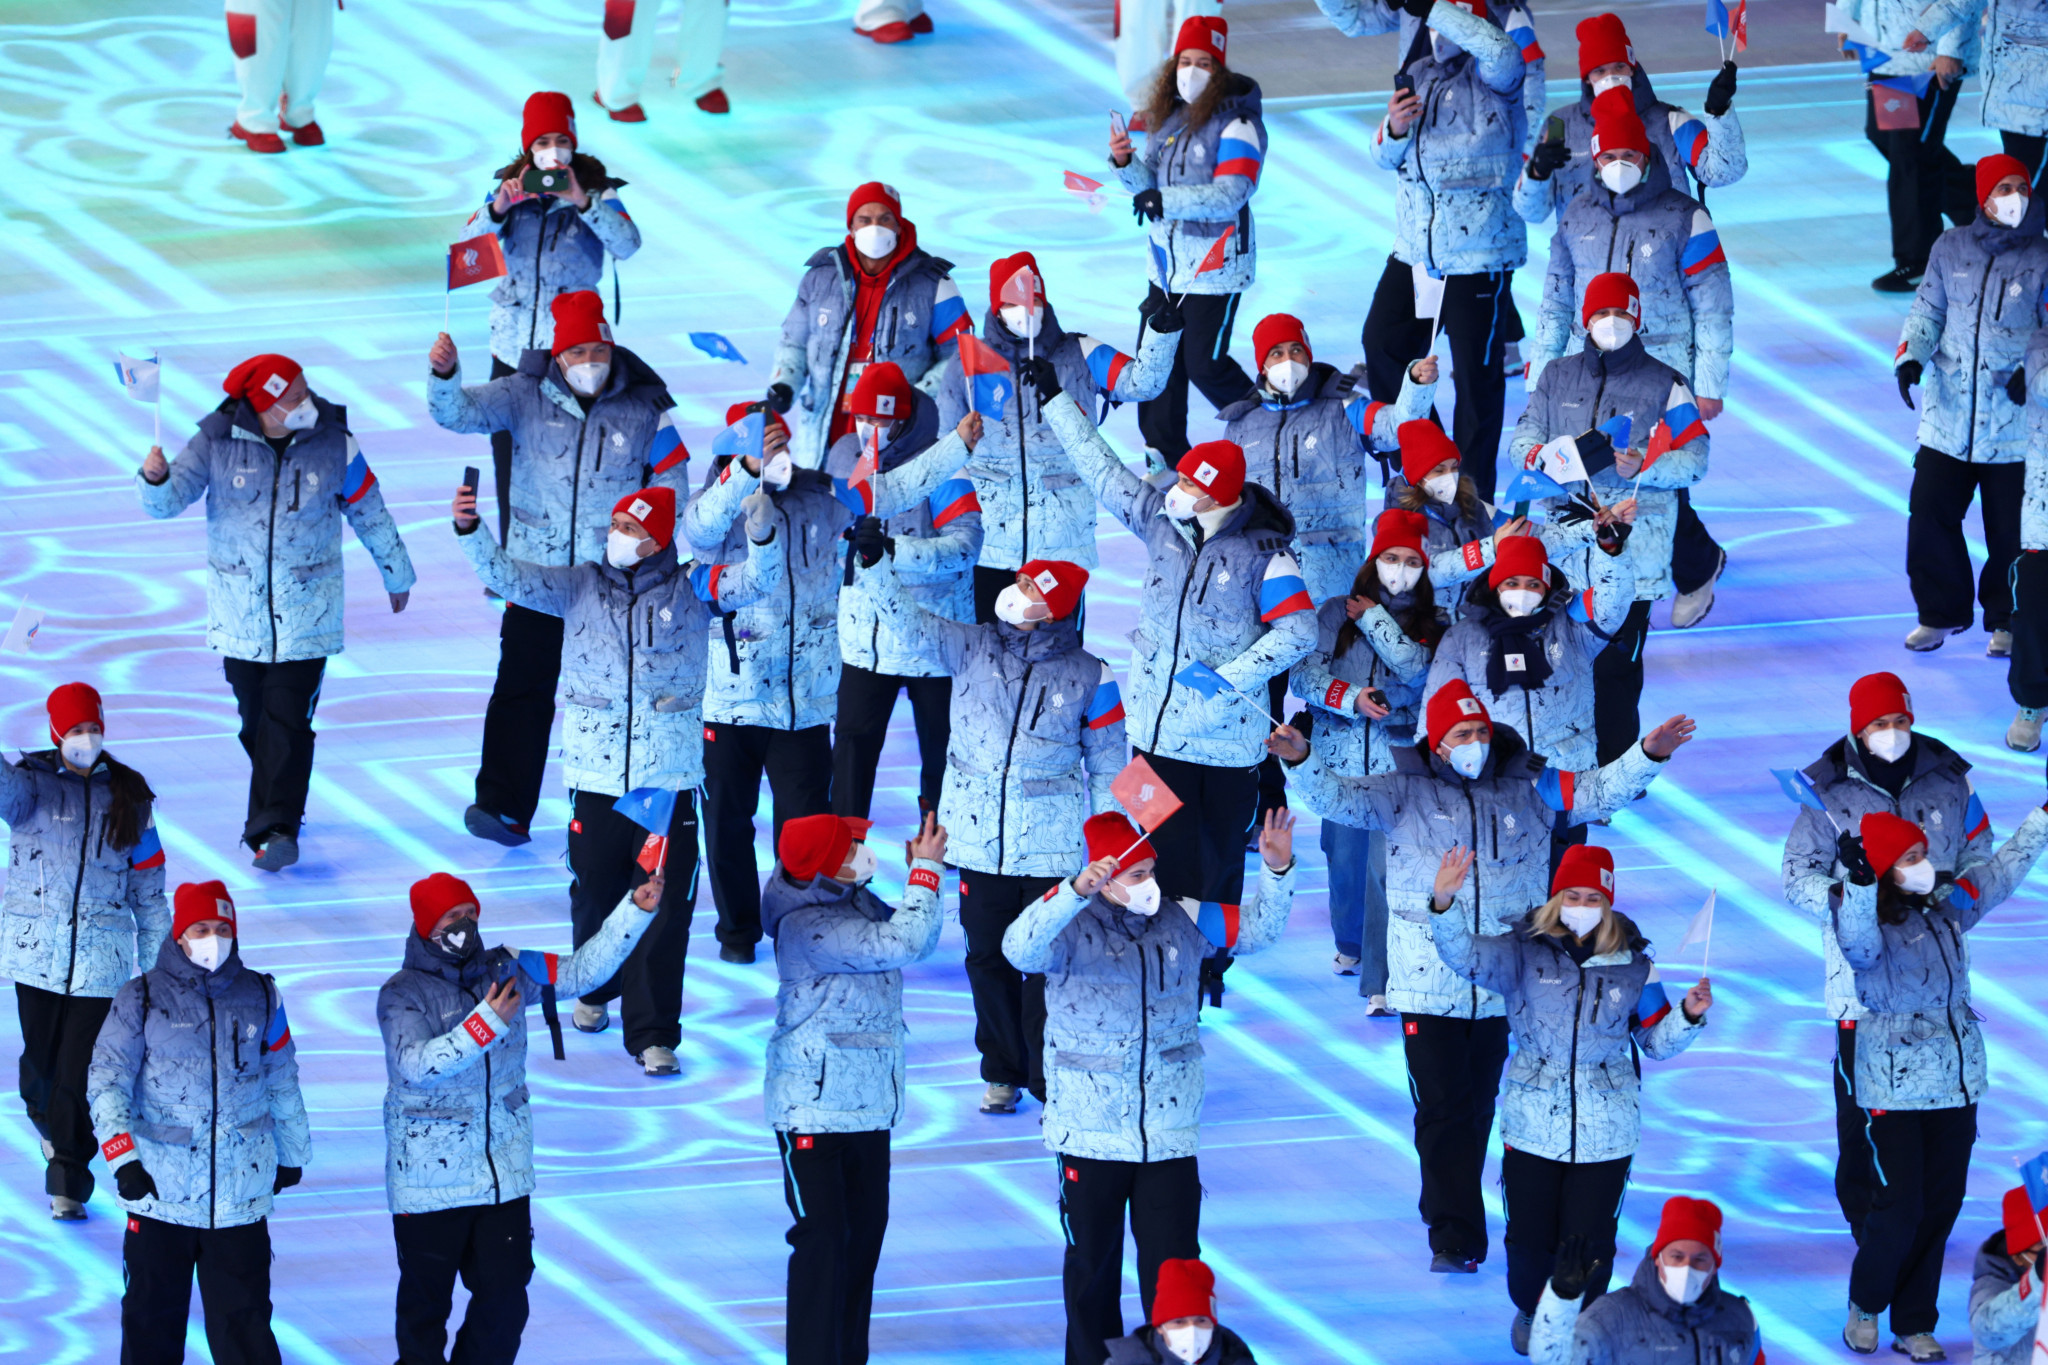 Russian athletes competing at Beijing 2022 are doing so under the ROC banner©Getty Images